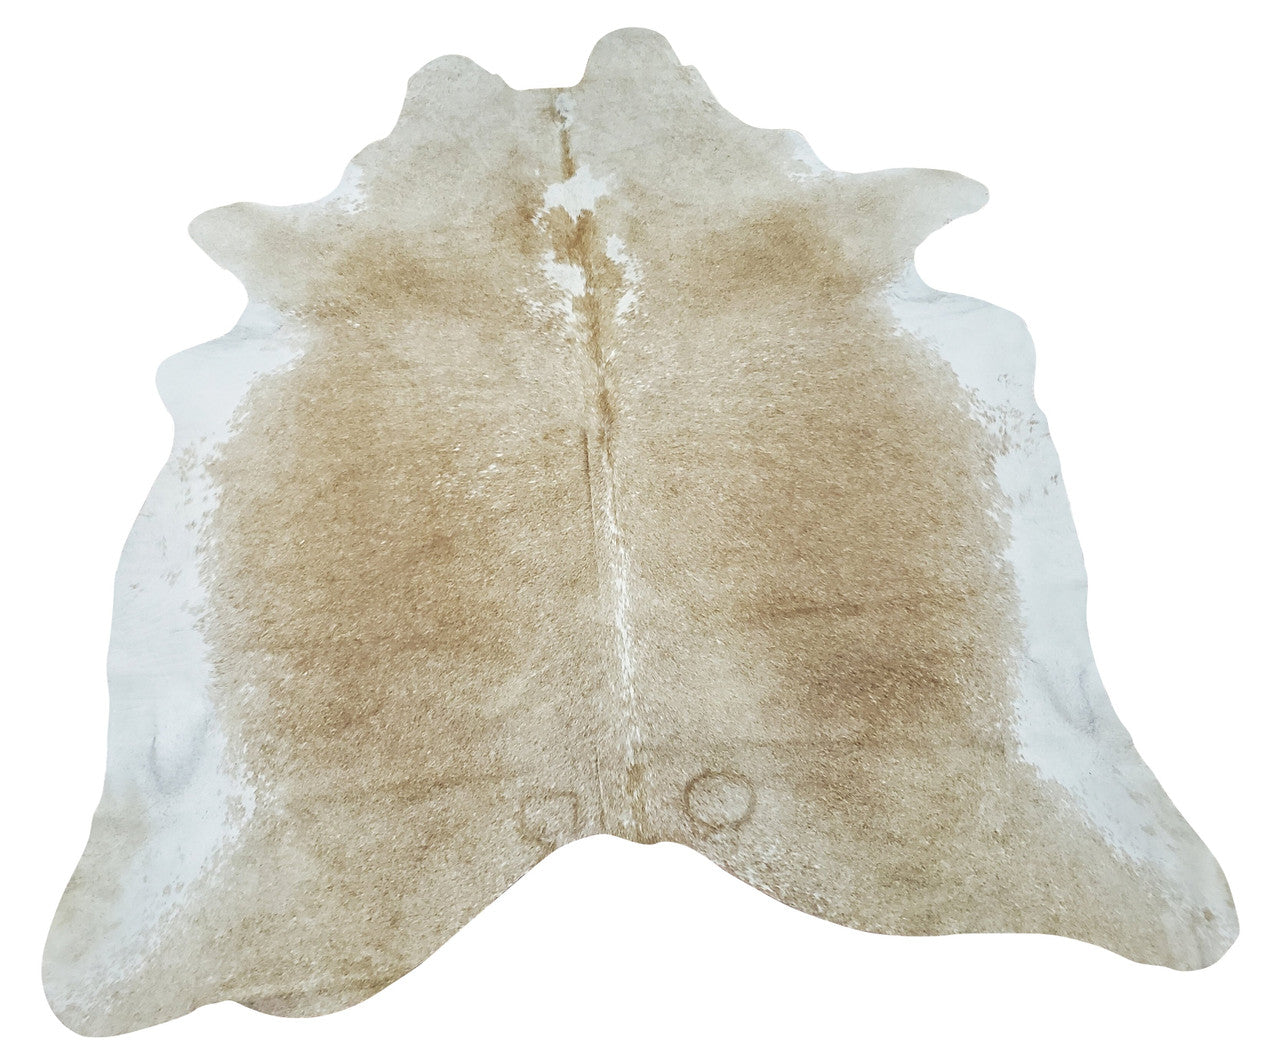 A cowhide rug is a great addition to any home. It is supple and soft to walk on, easy to layer, and easy to maintain. Hypo allergenic, it is also great for entry way.